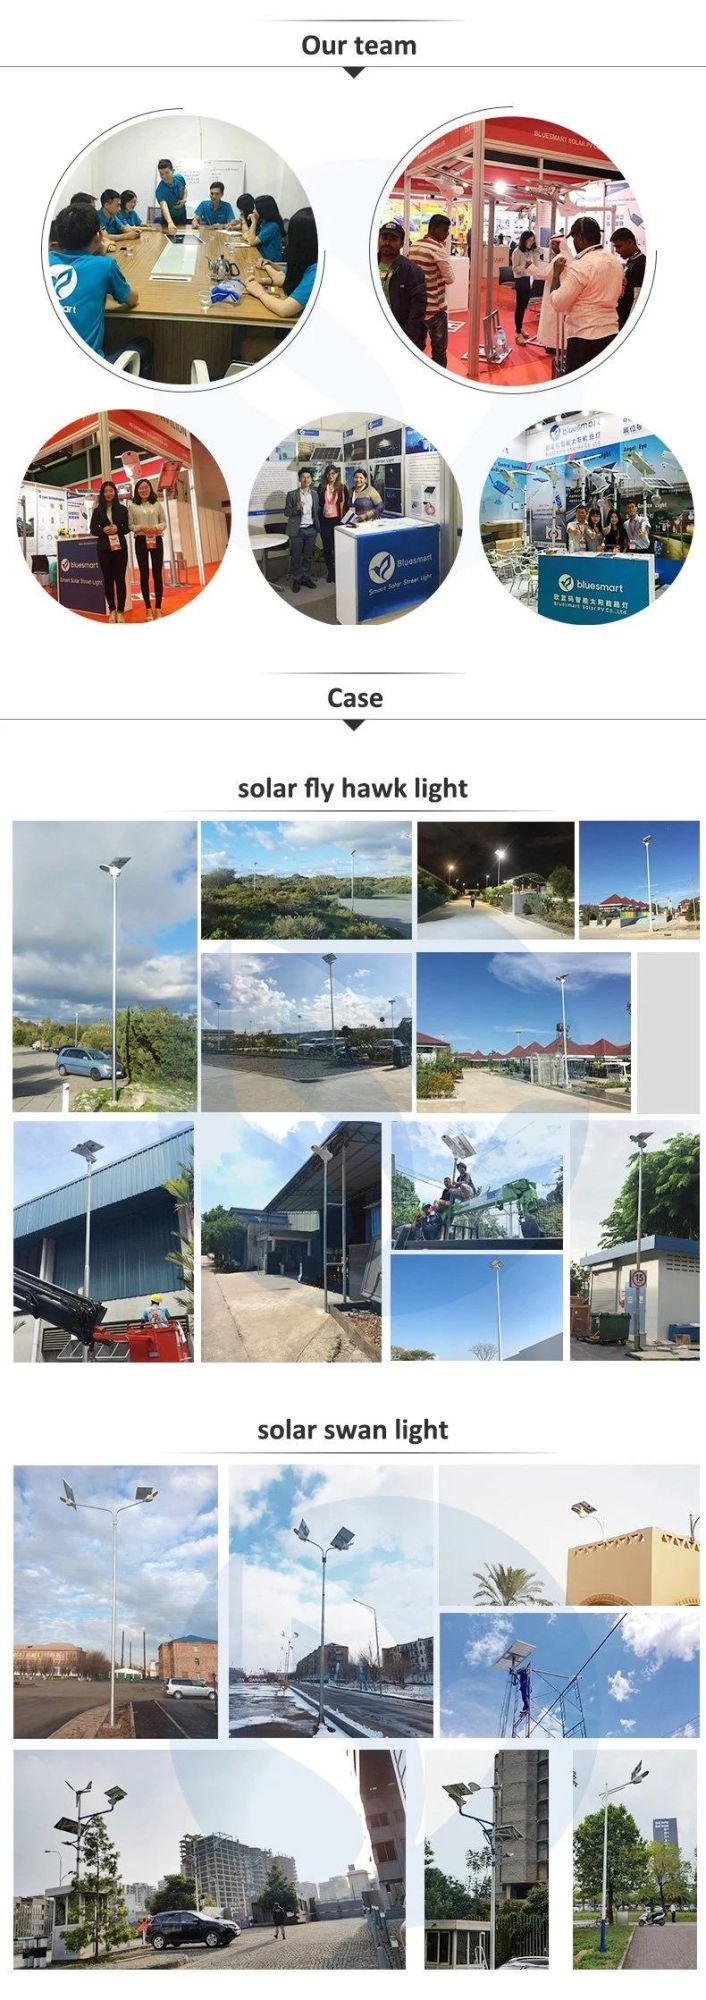 All-in-One Integrated Outdoor Solar LED Street Light with Soalr Panel